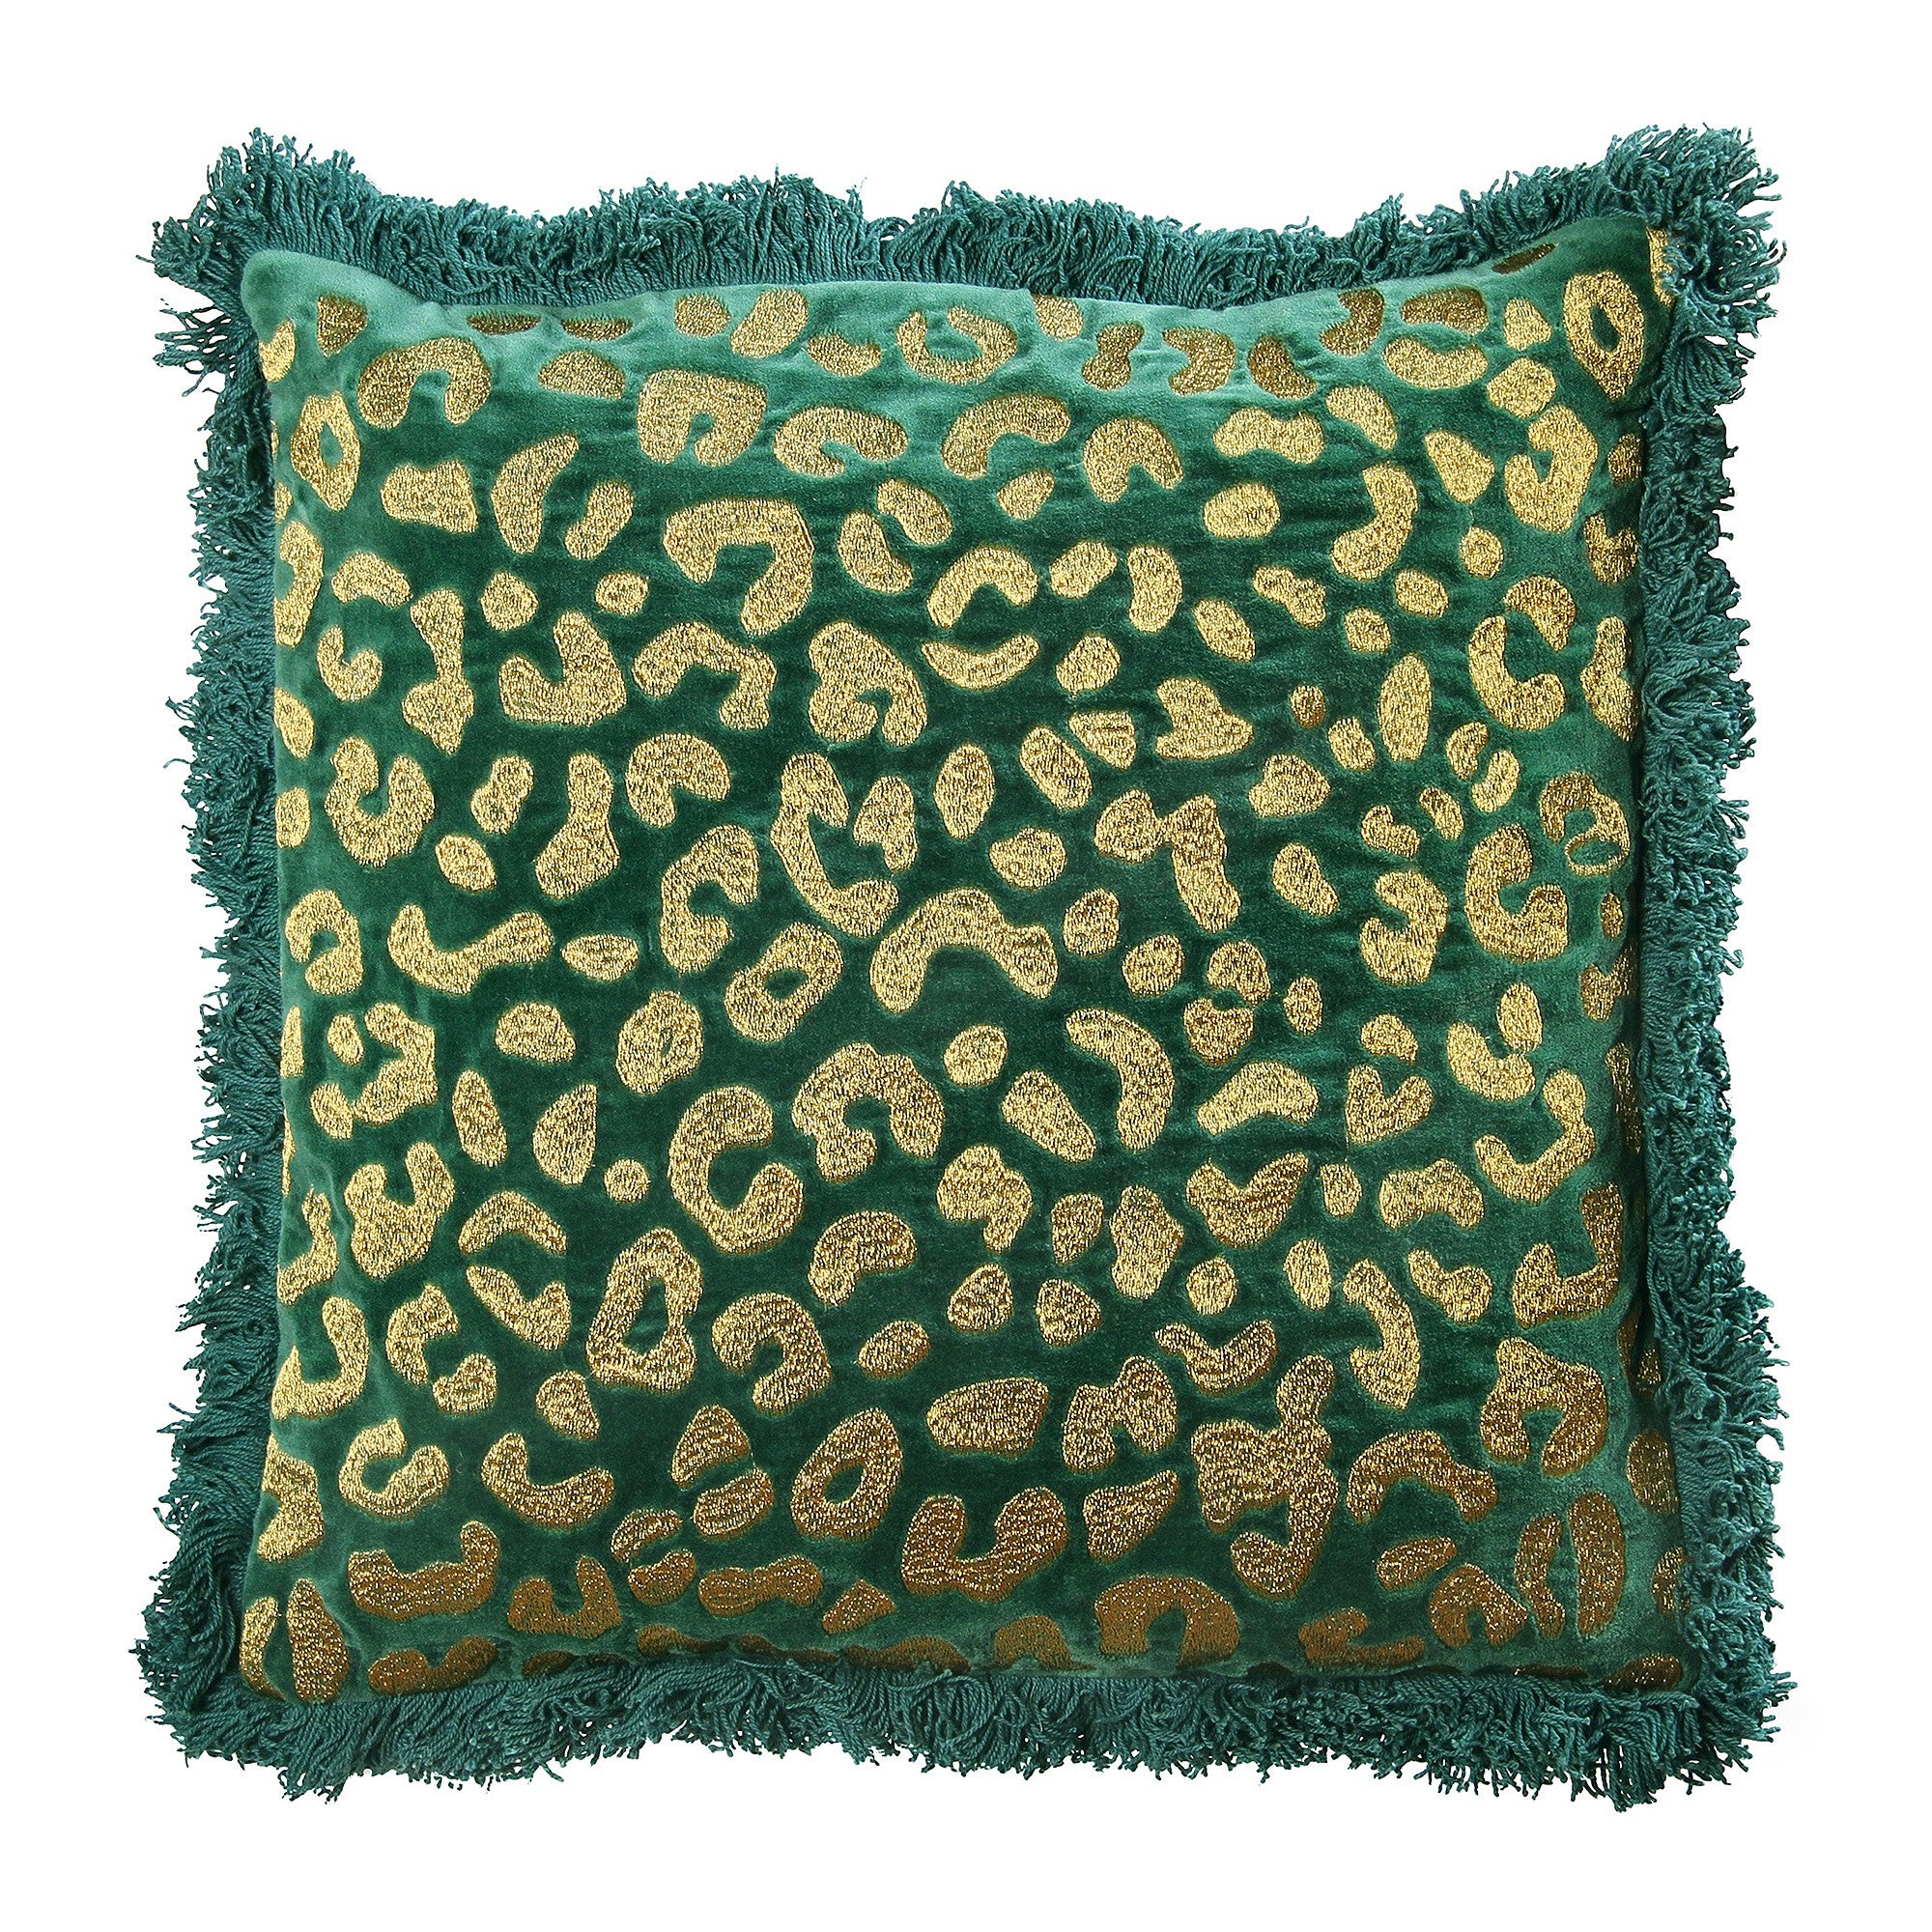 Green and Gold Leopard Print Cushion